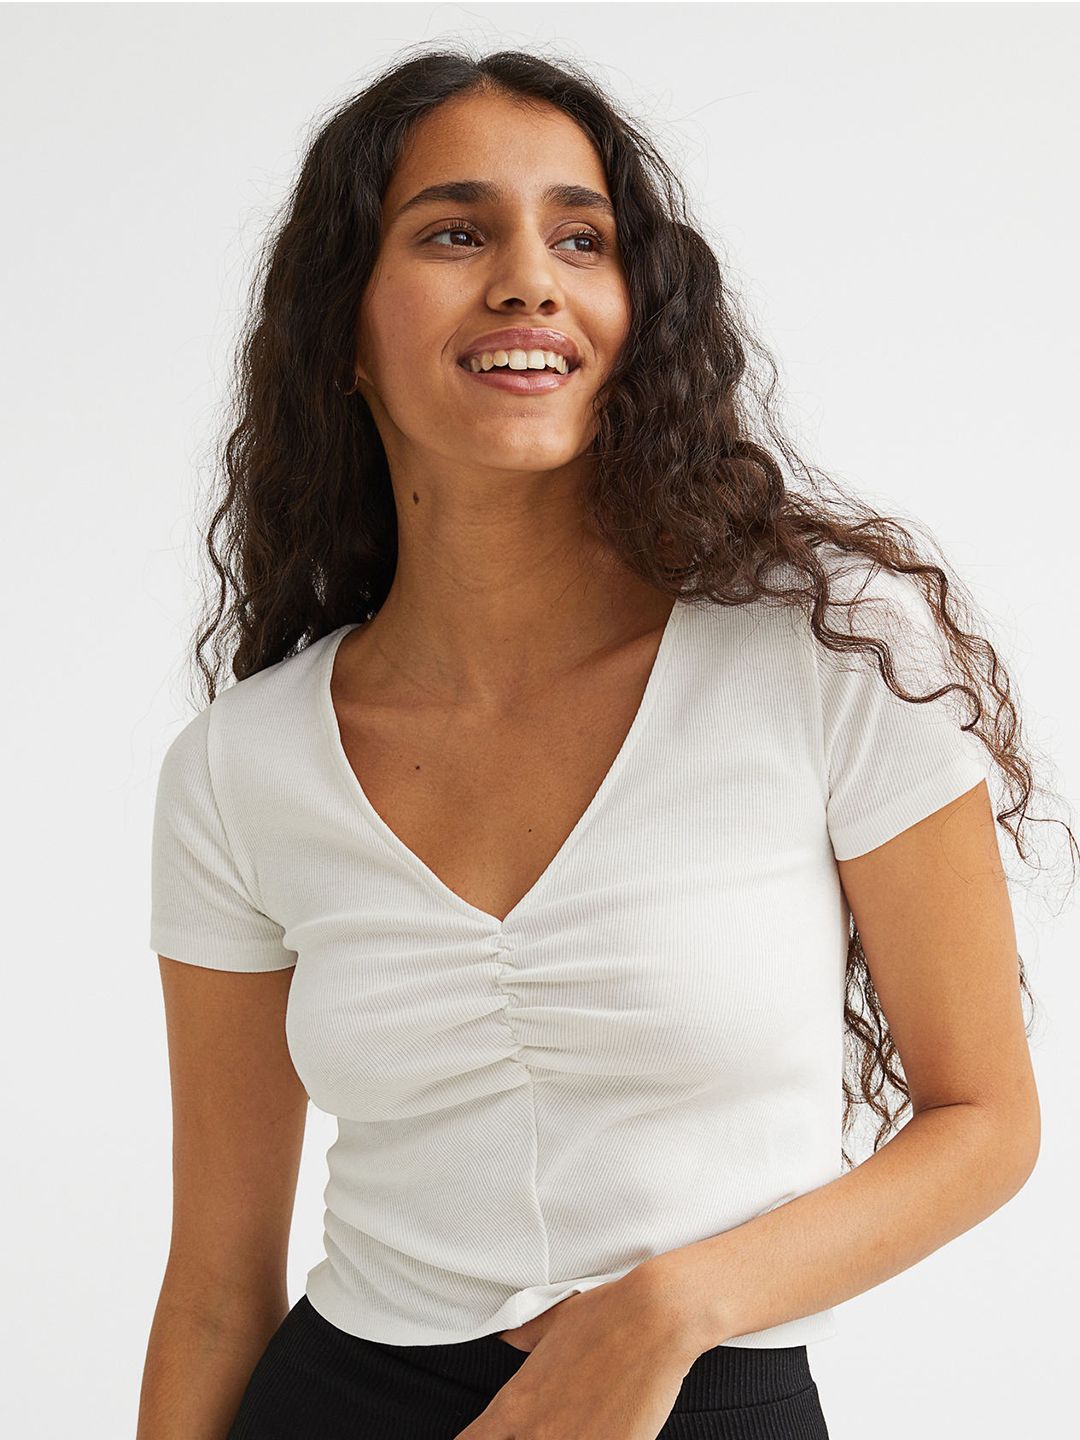 H&M Women White Ribbed Top Price in India